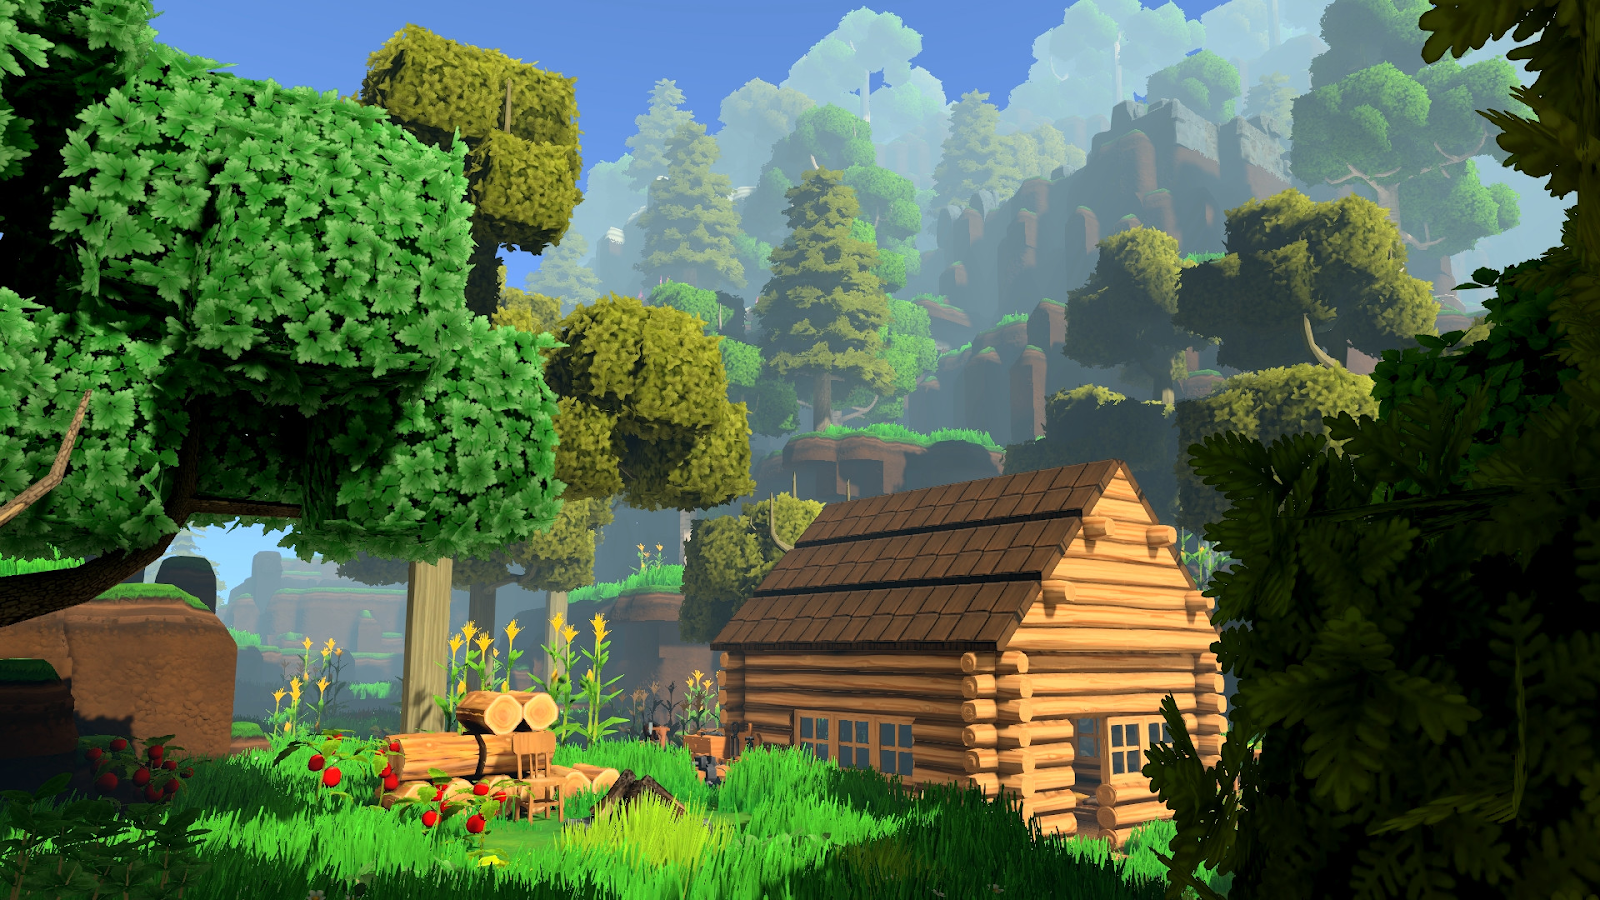 Games Can Teach About Climate Change and Motivate Ecofriendly Actions